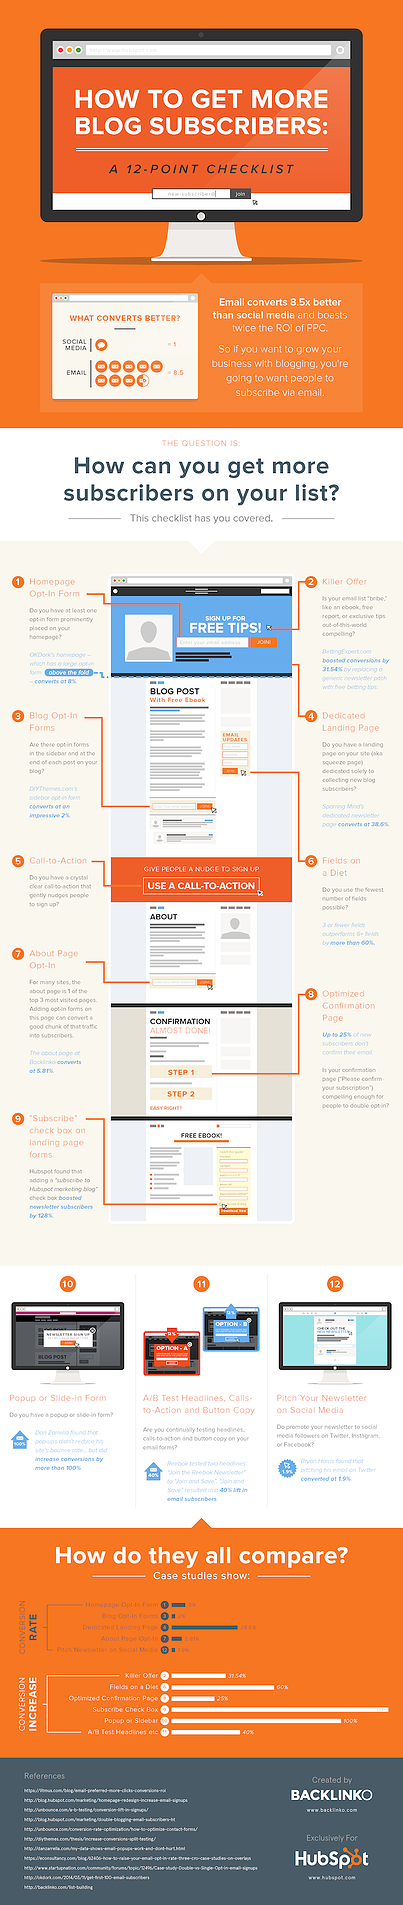 12 Ways to Get More Blog Subscribers [Infographic]